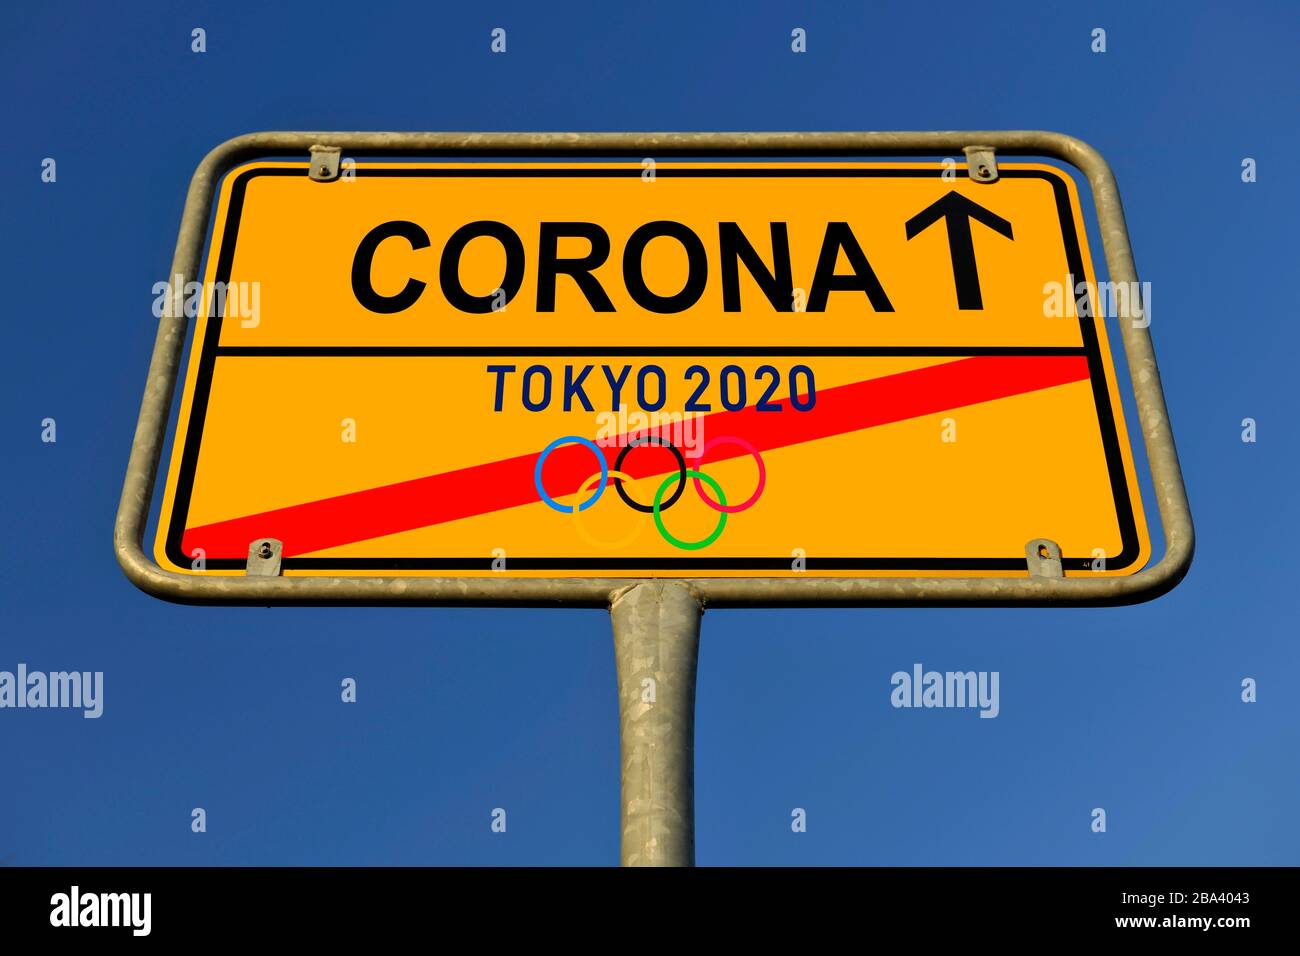 Digital composing, symbol picture, Cancellation or postponement of the 2020 Olympic Summer Games in Tokyo due to coronavirus, Sars-CoV-2, Covid-19 Stock Photo